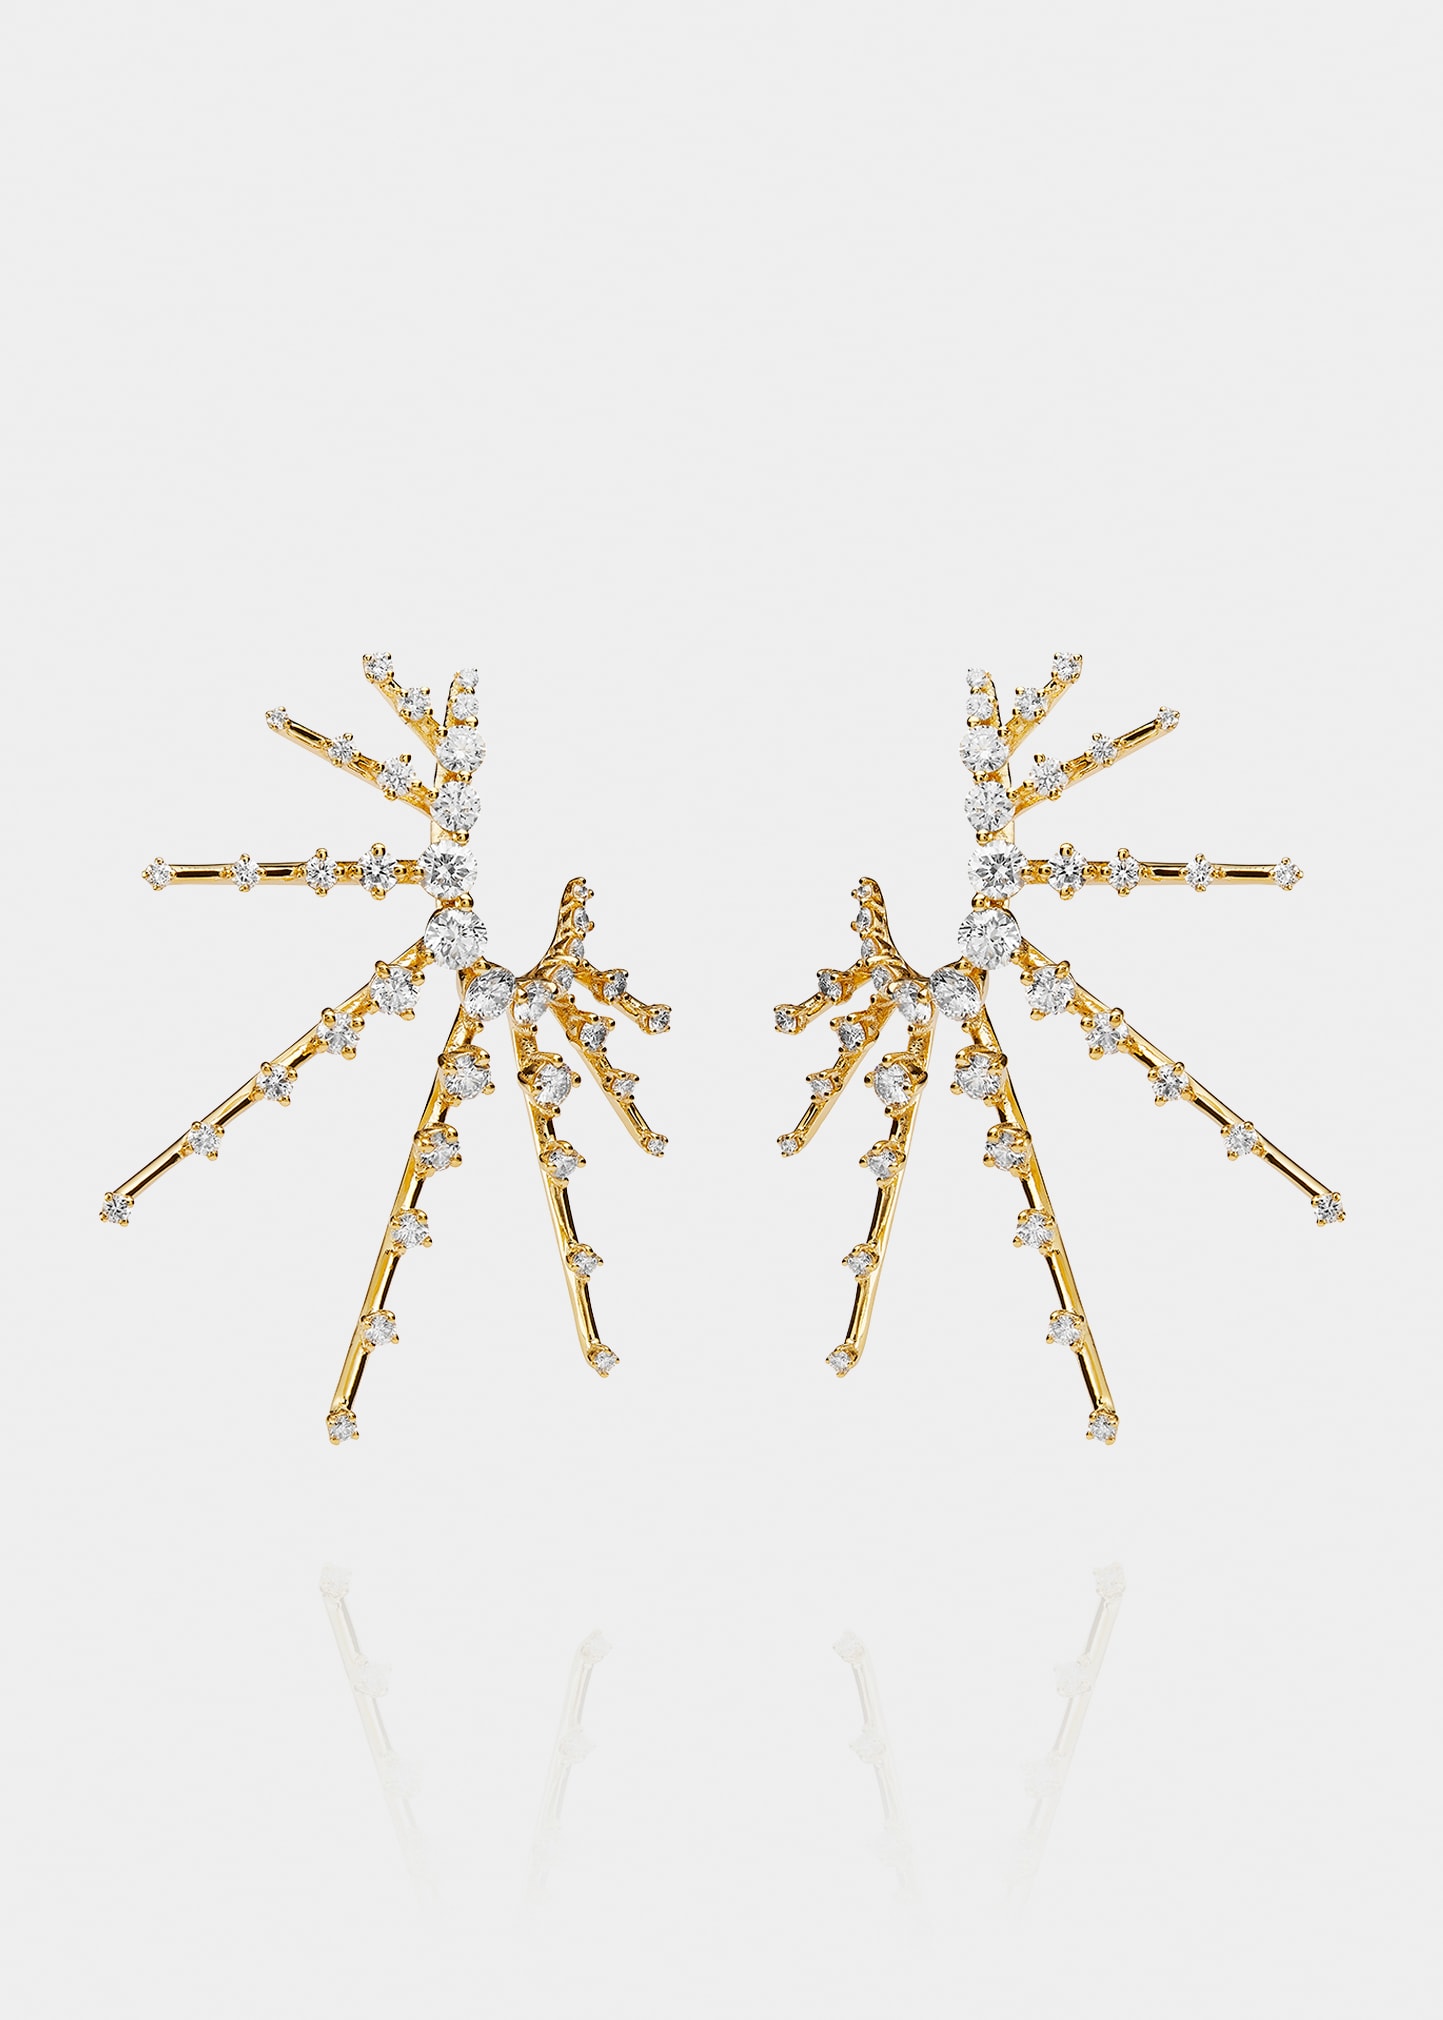 Radiant Earrings in Yellow Gold and Diamonds